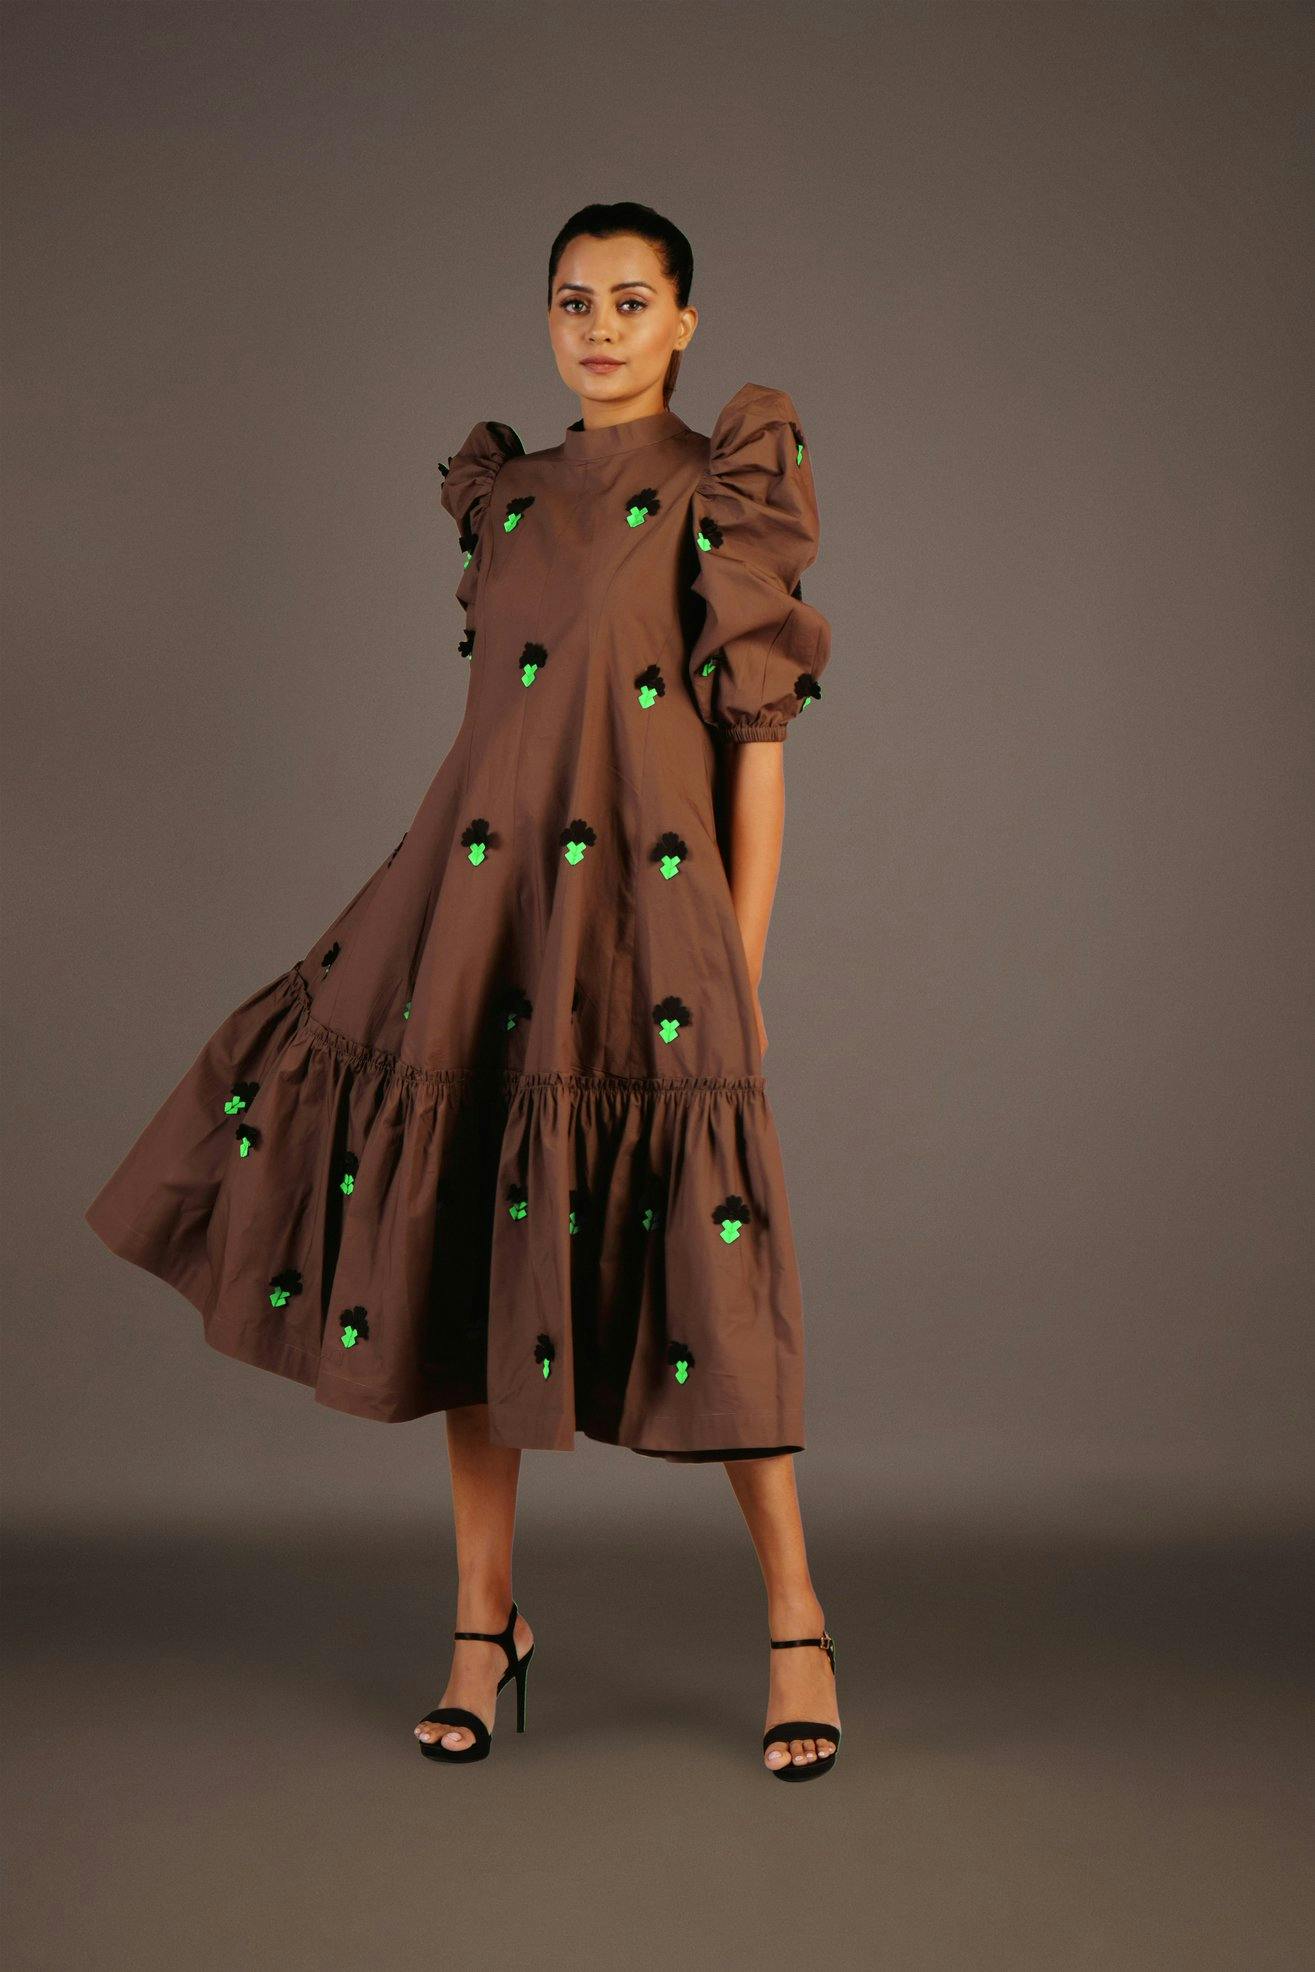 Olive green dress with oversized sleeves with confetti detailing, a product by Deepika Arora